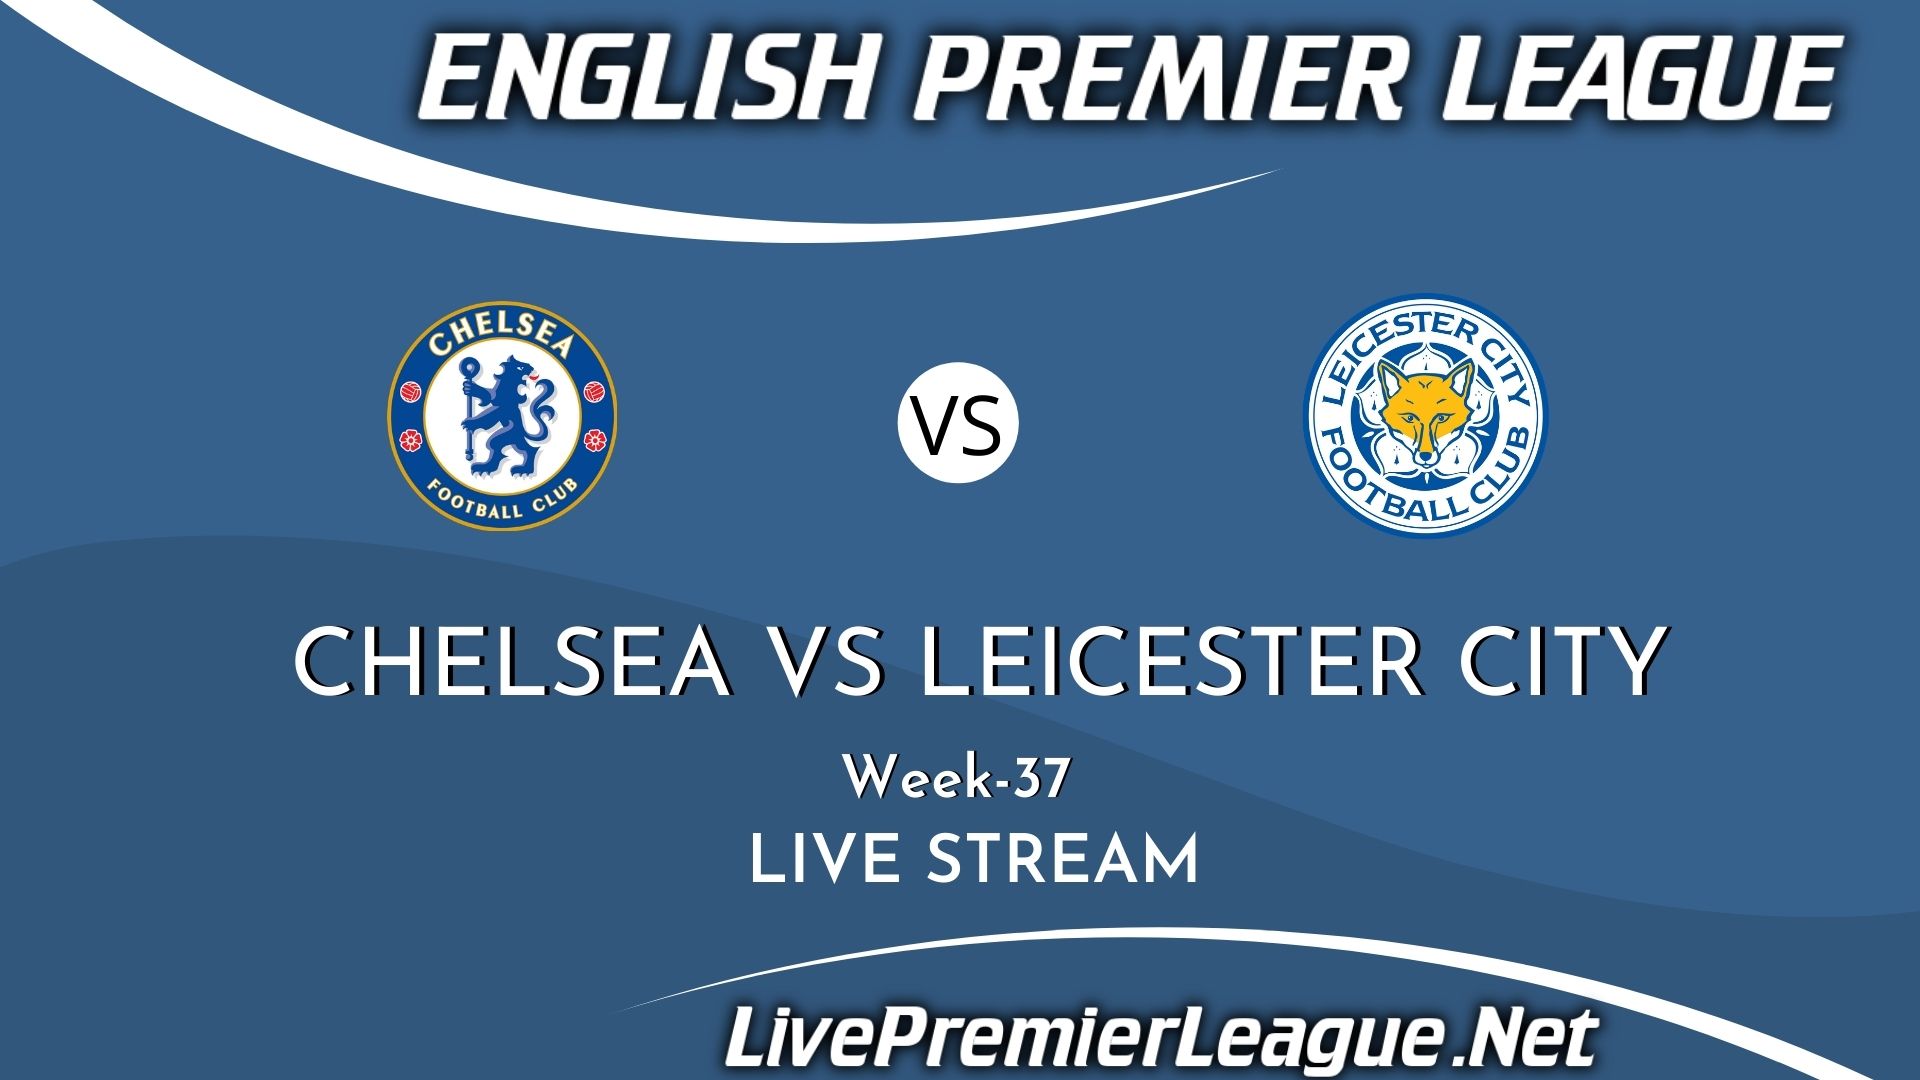 Chelsea Vs Leicester City Live Stream 2021 | EPL Week 37